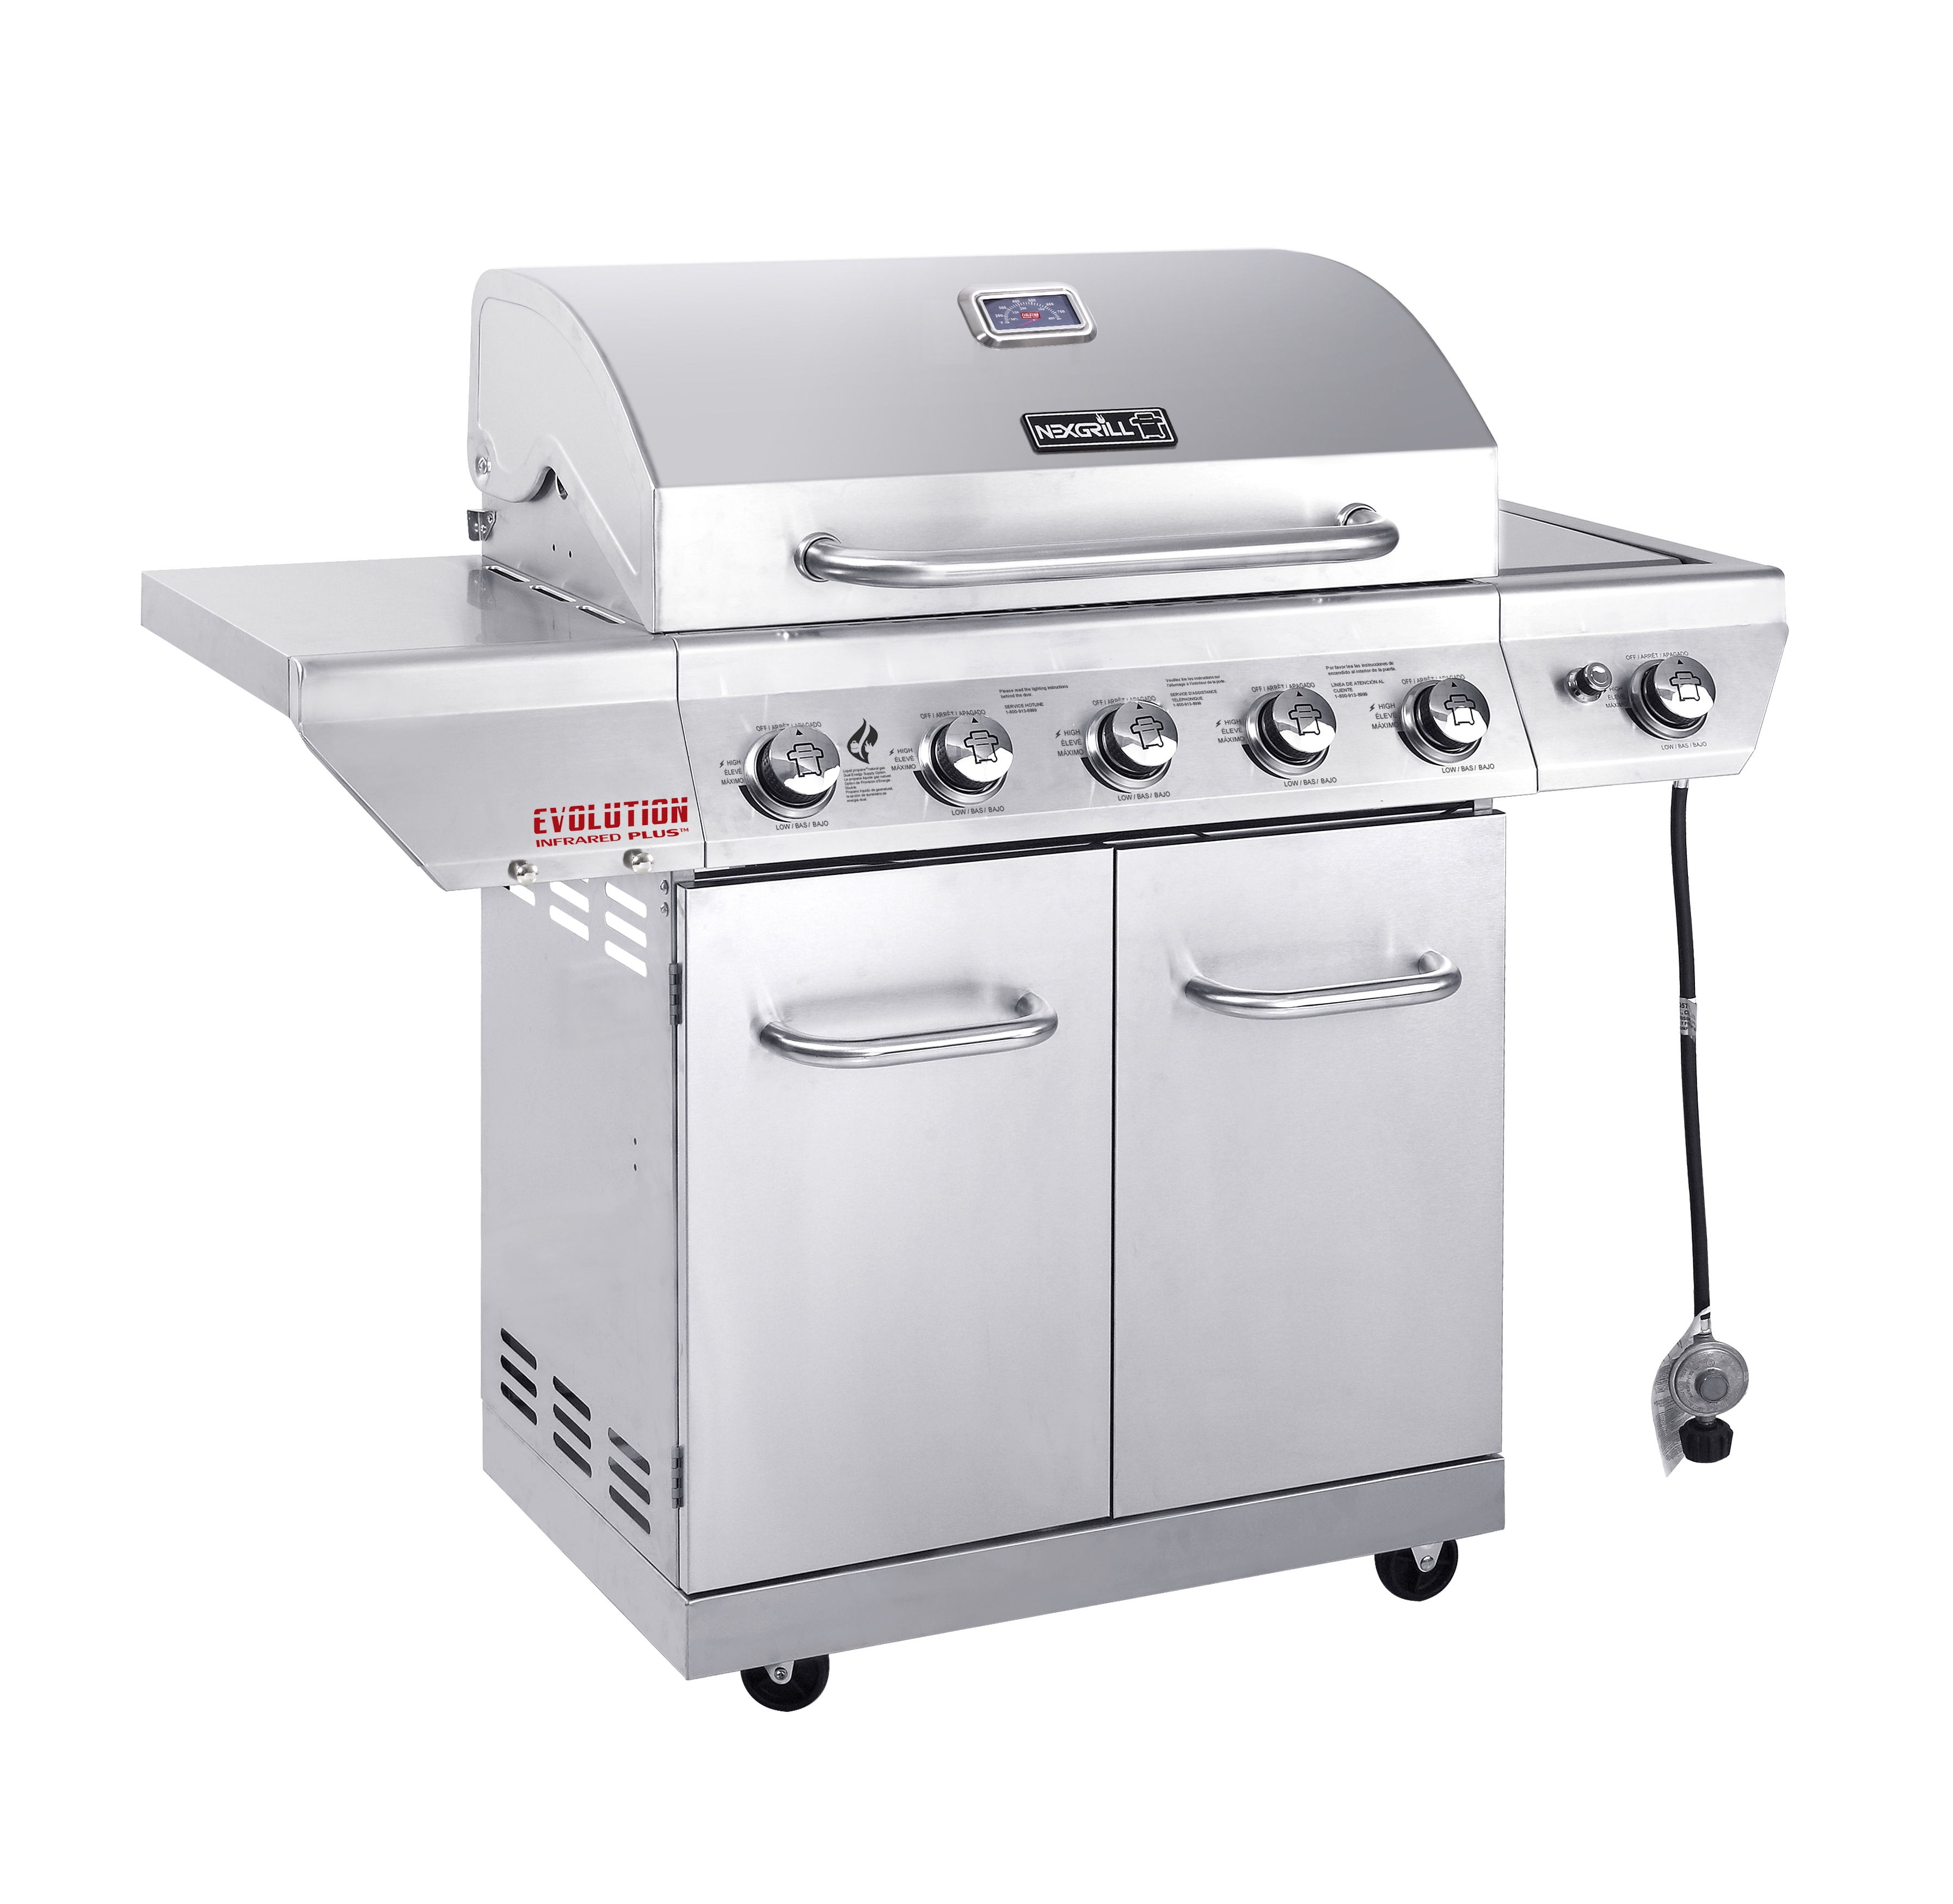 Stainless-steel gas grill by Nexgrill